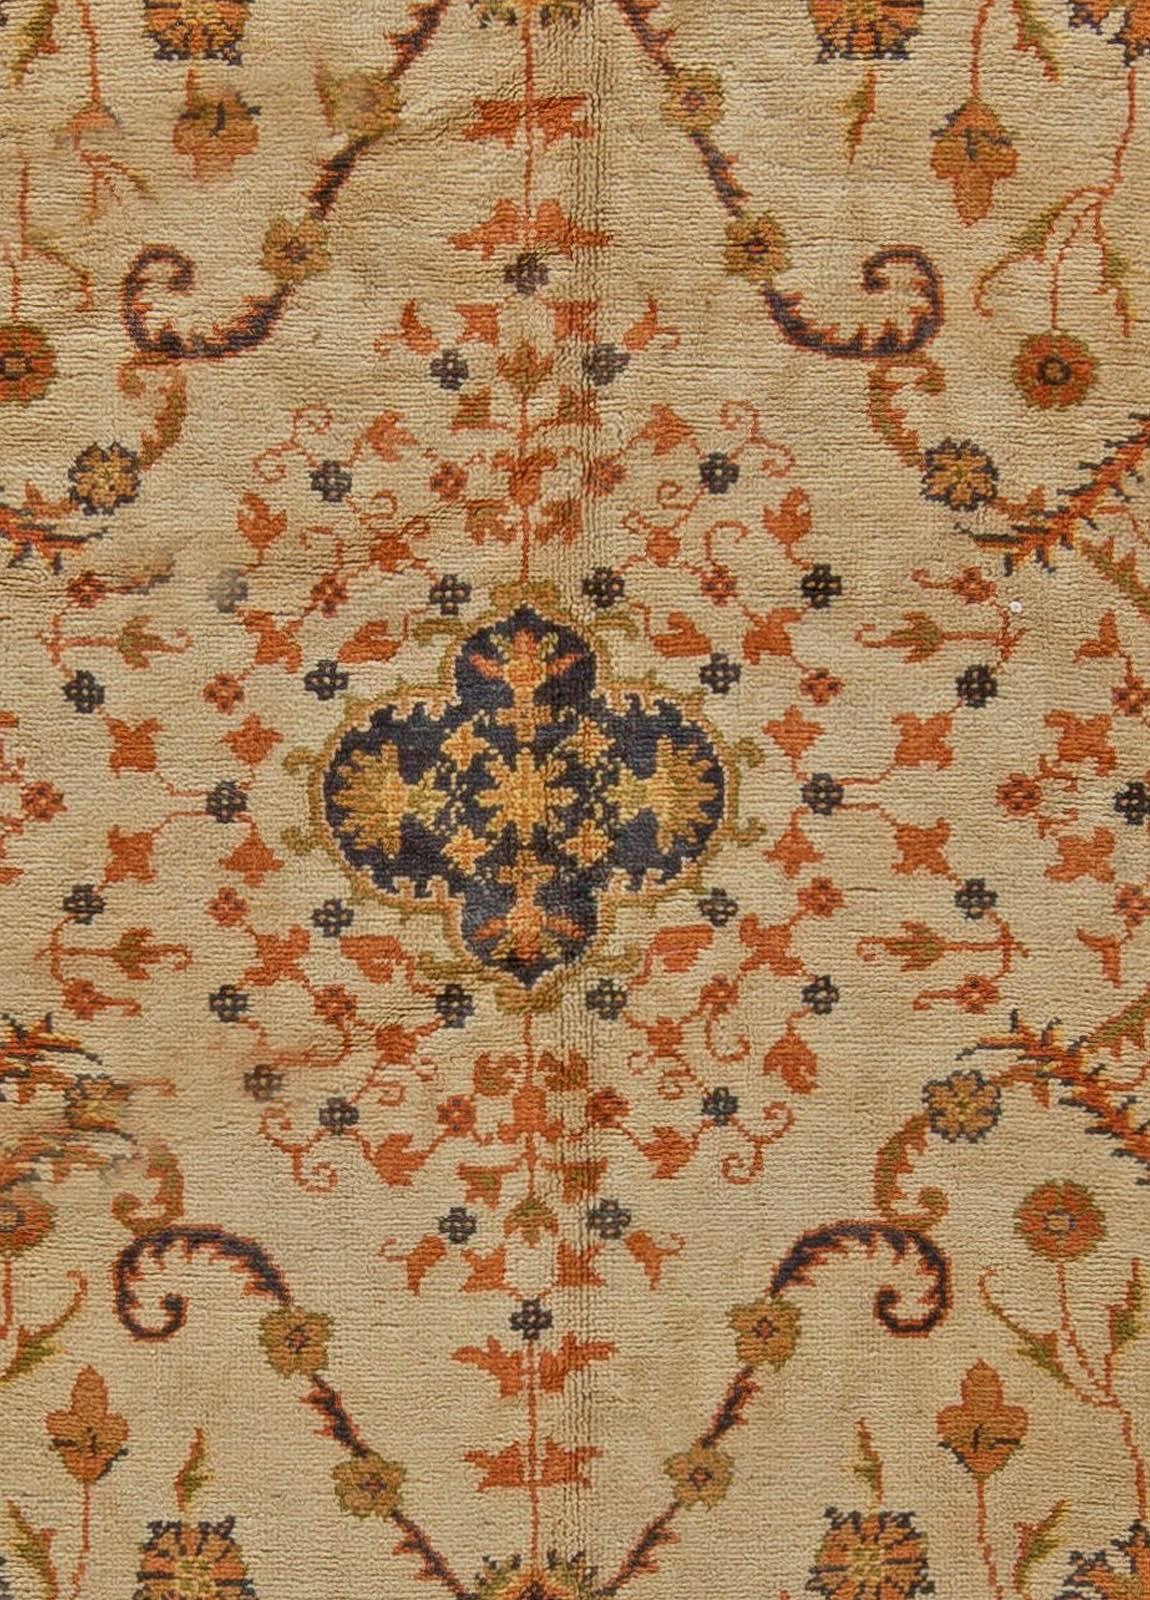 1900s Turkish Oushak camel and orange with floral motifs handwoven wool rug
Size: 10'0